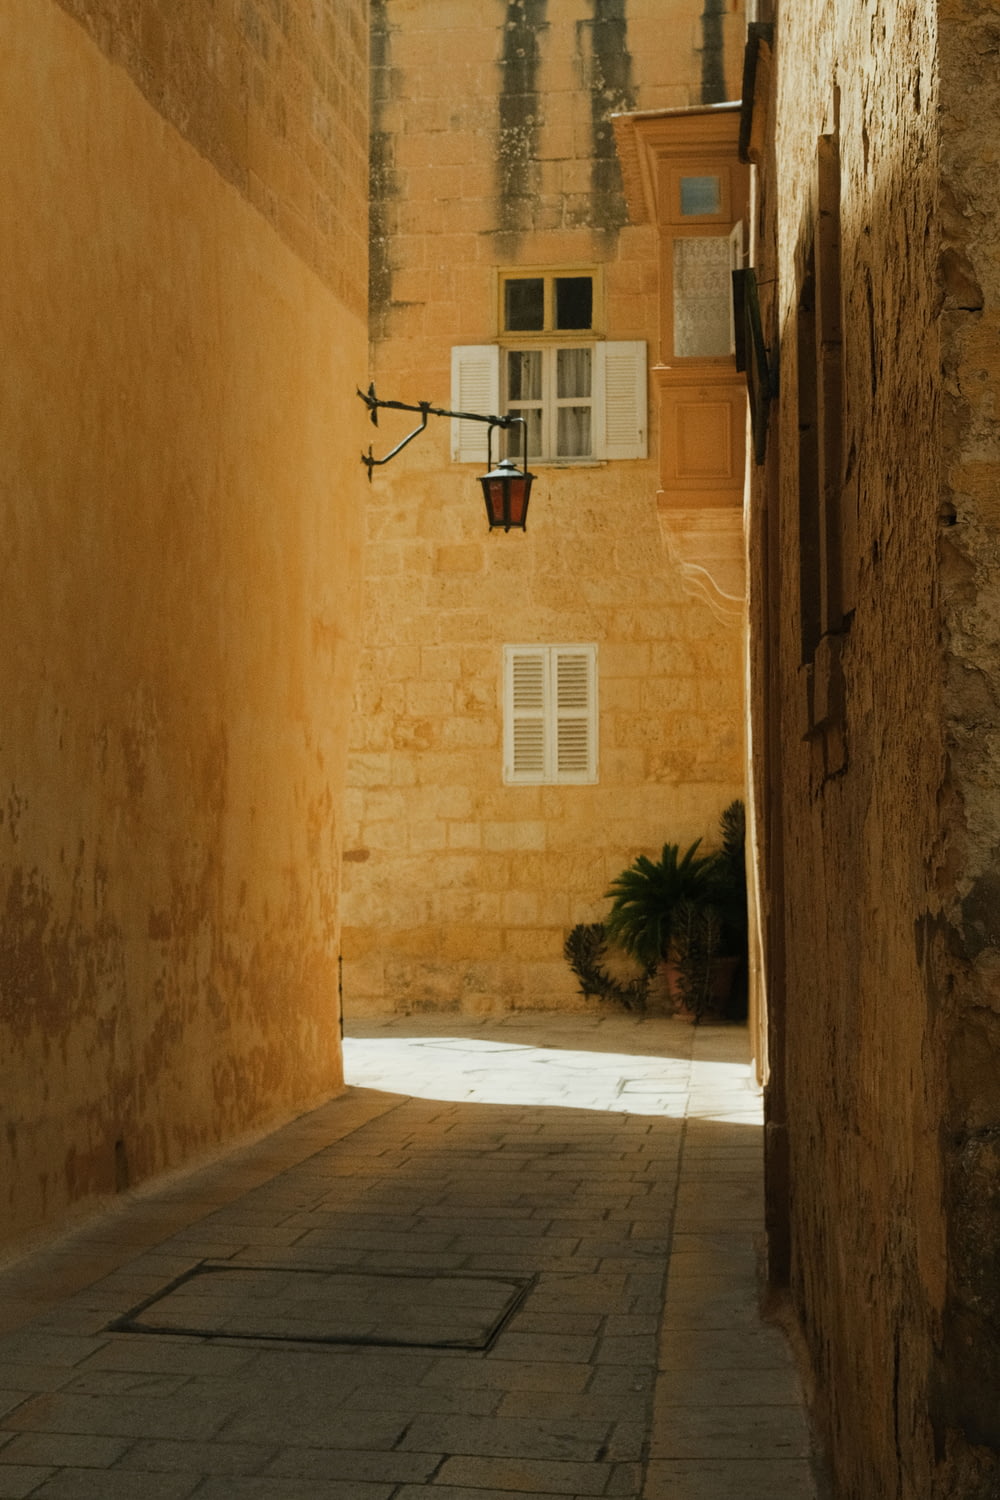 a narrow alley way with a lamp on the wall